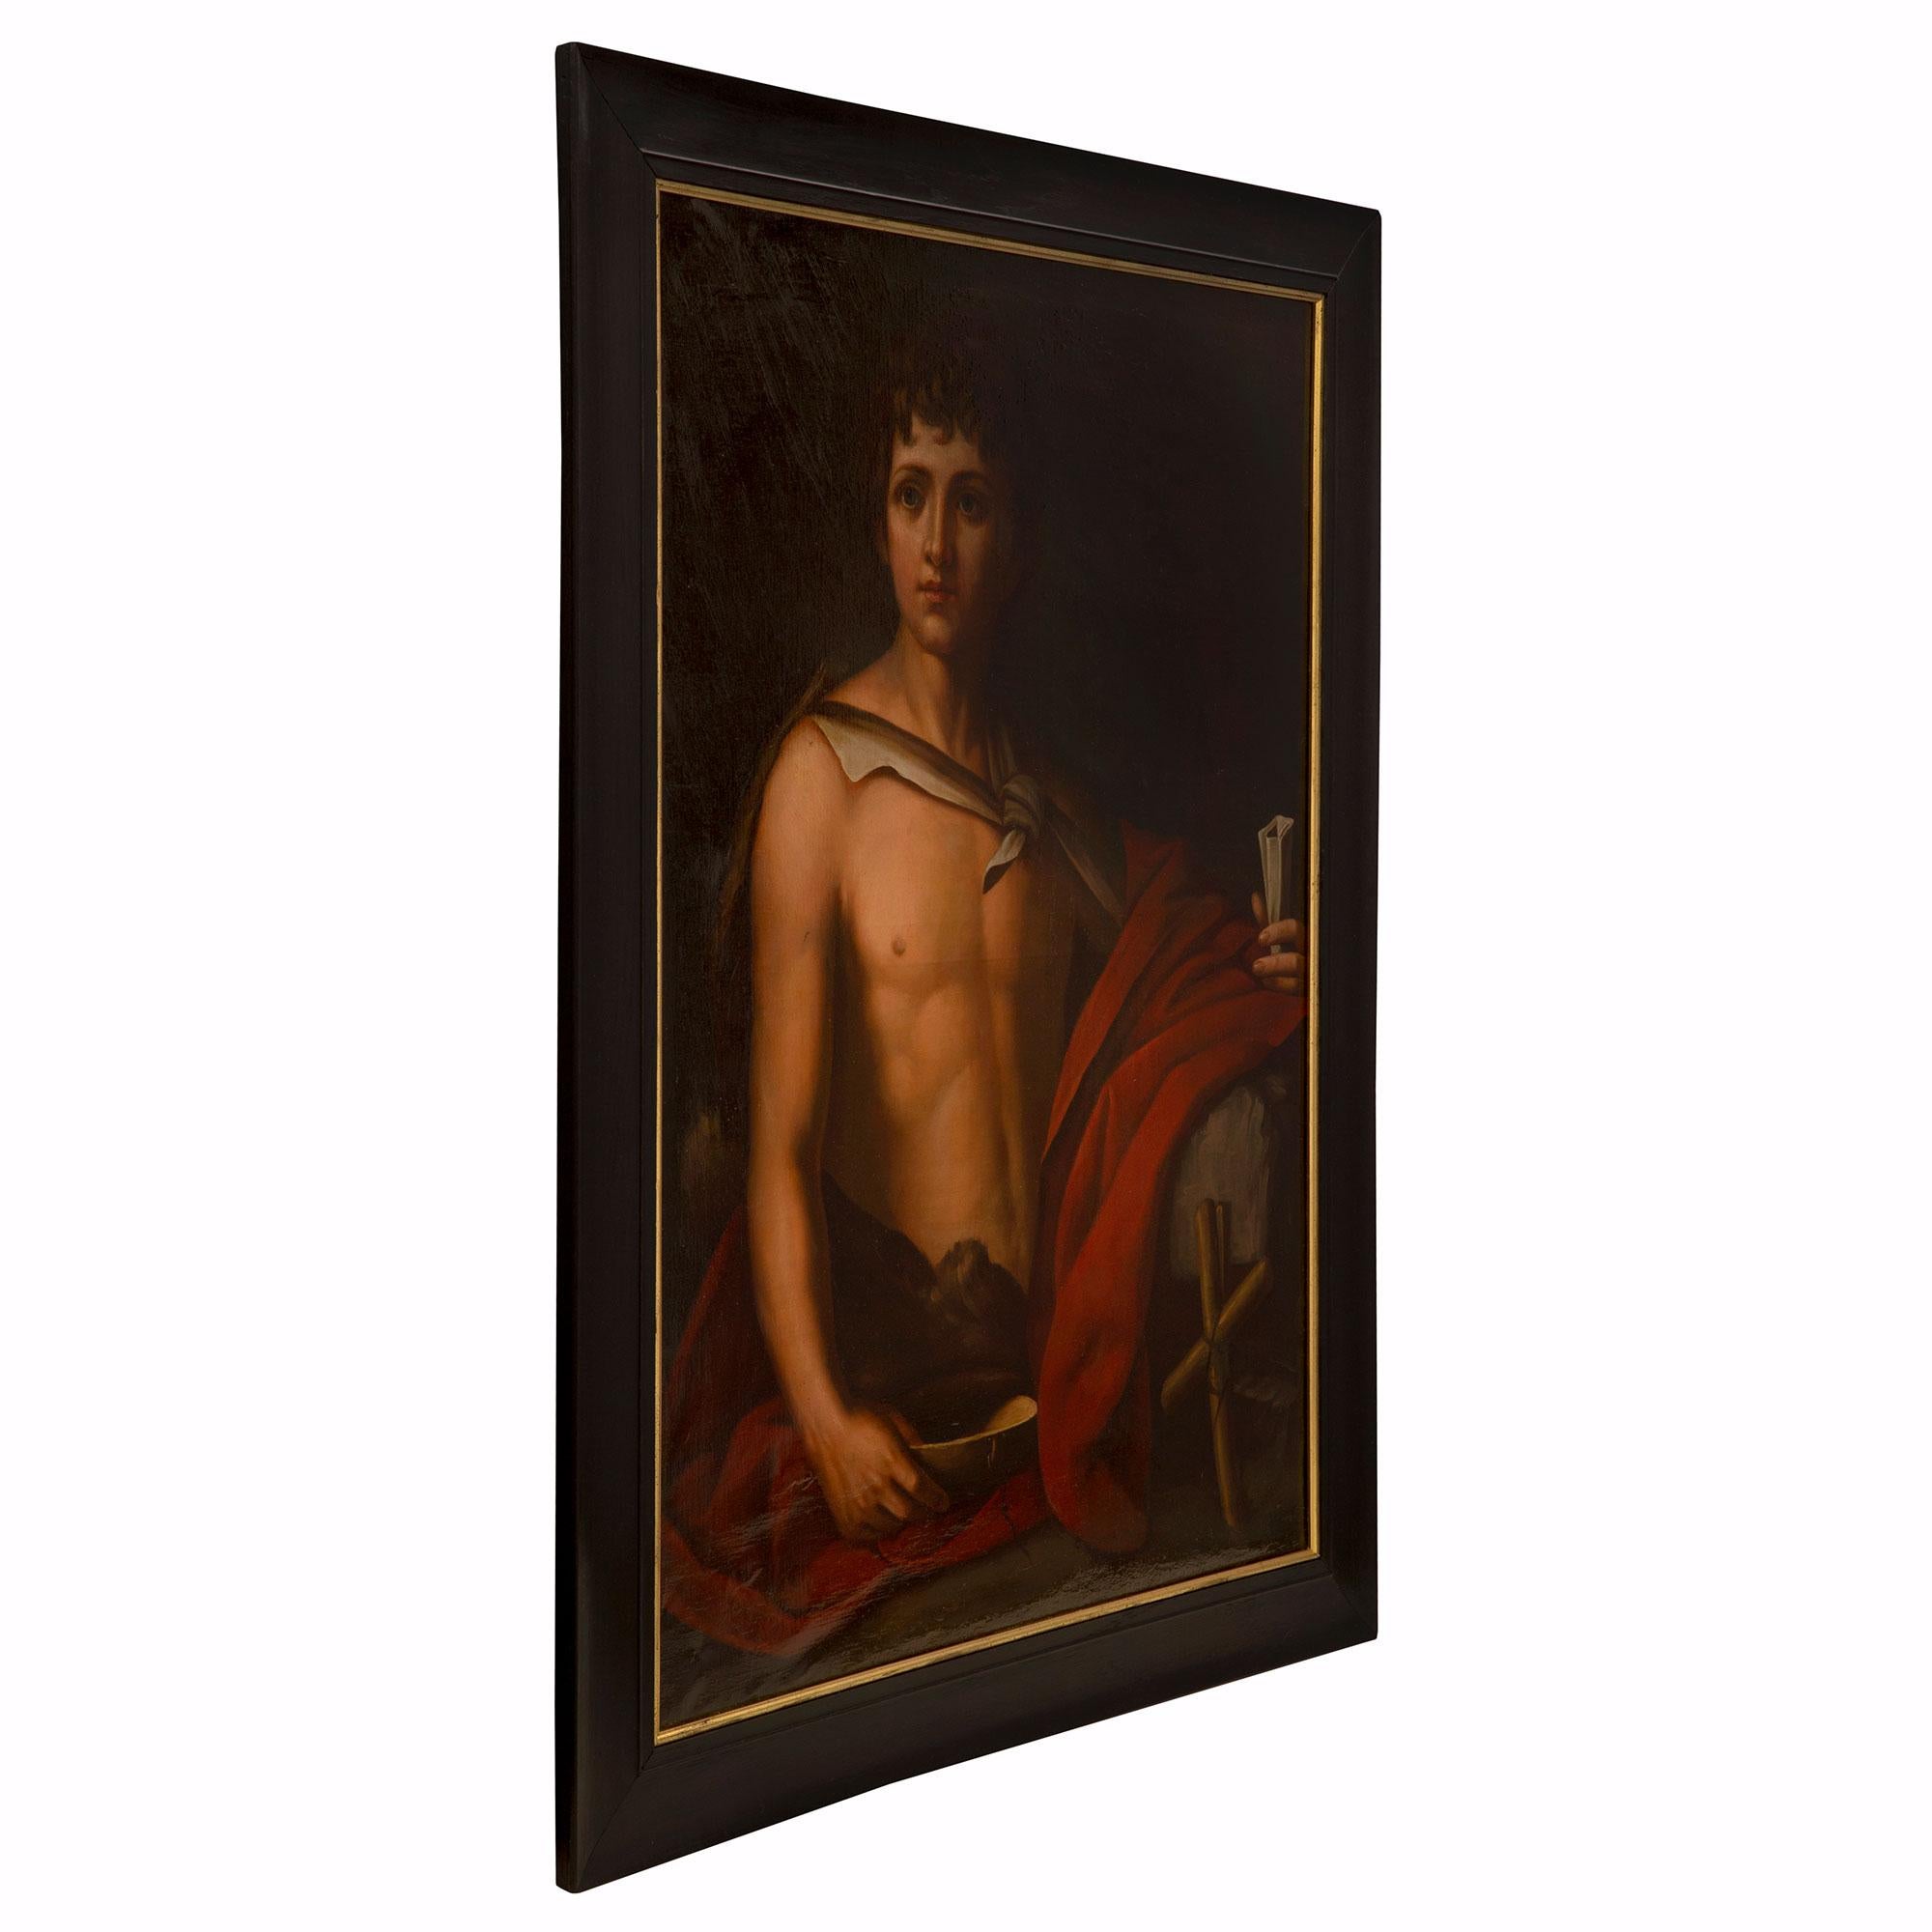 A fine Italian 19th century neo-classical st. oil on canvas painting of a young man. The young man has his red cloak draped over his left arm while holding a scroll in his left hand. He holds a bowl by his side with a cross in the foreground. Framed